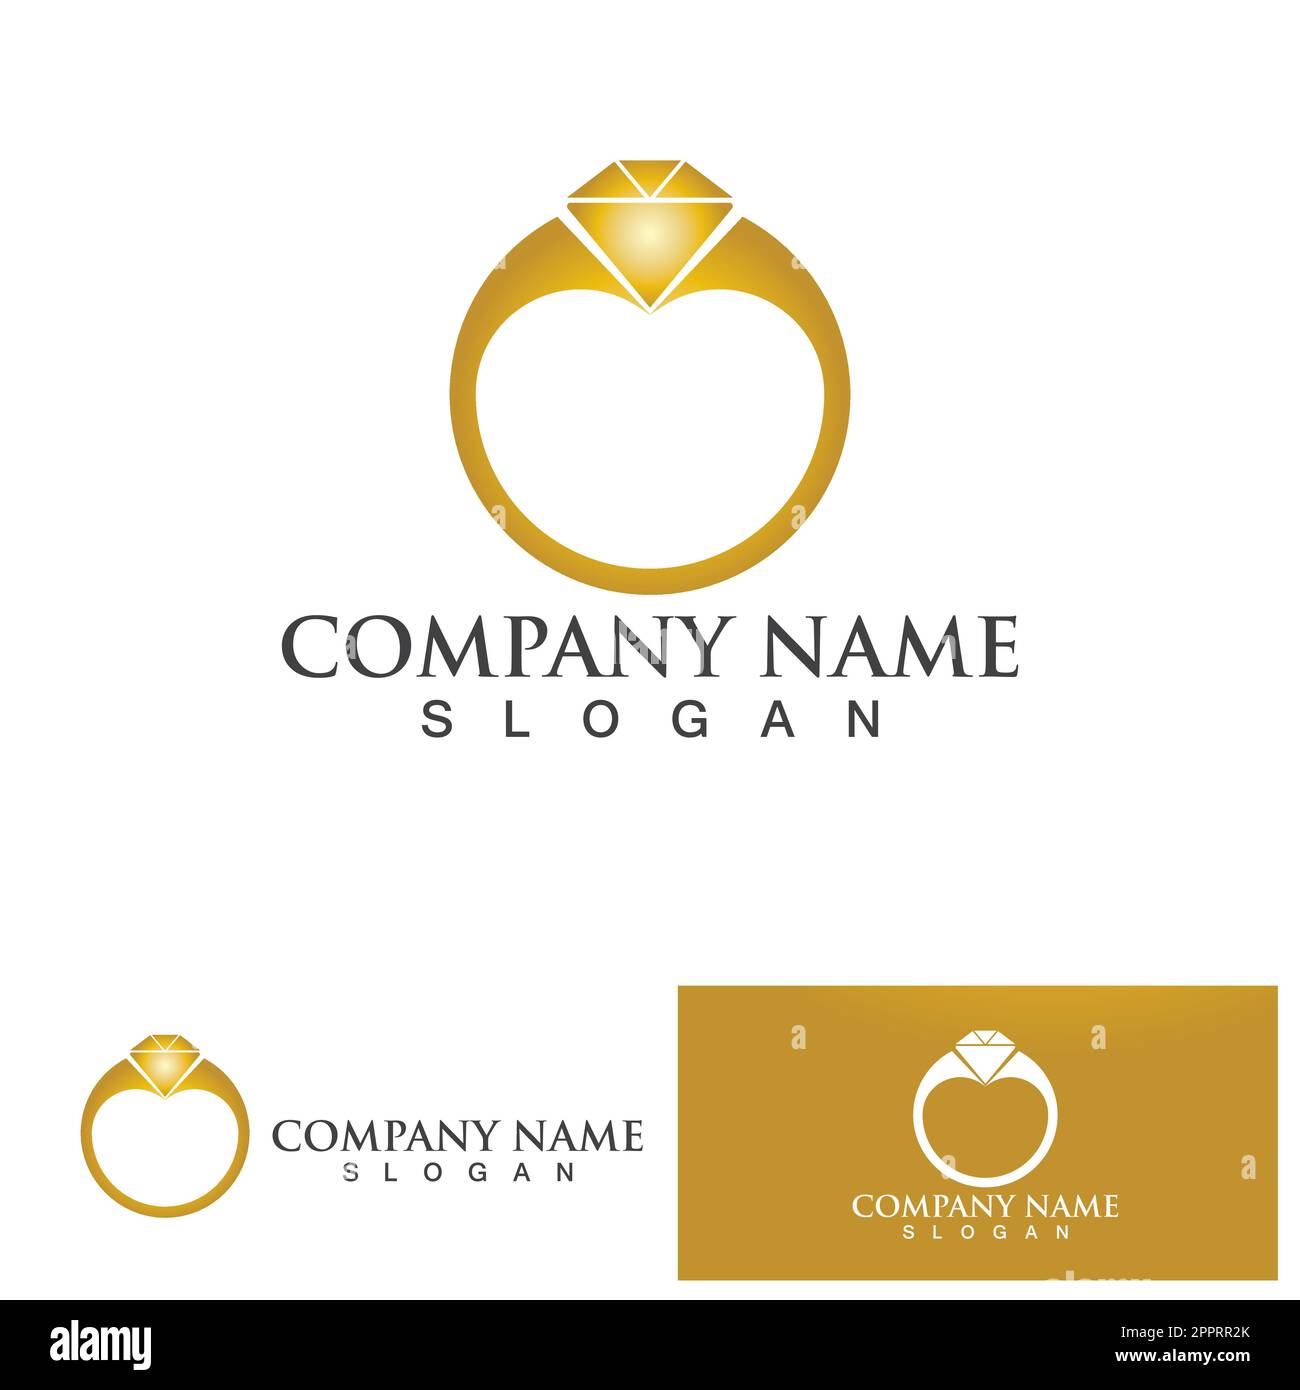 Abstract Ring Company Logo | BrandCrowd Logo Maker | BrandCrowd